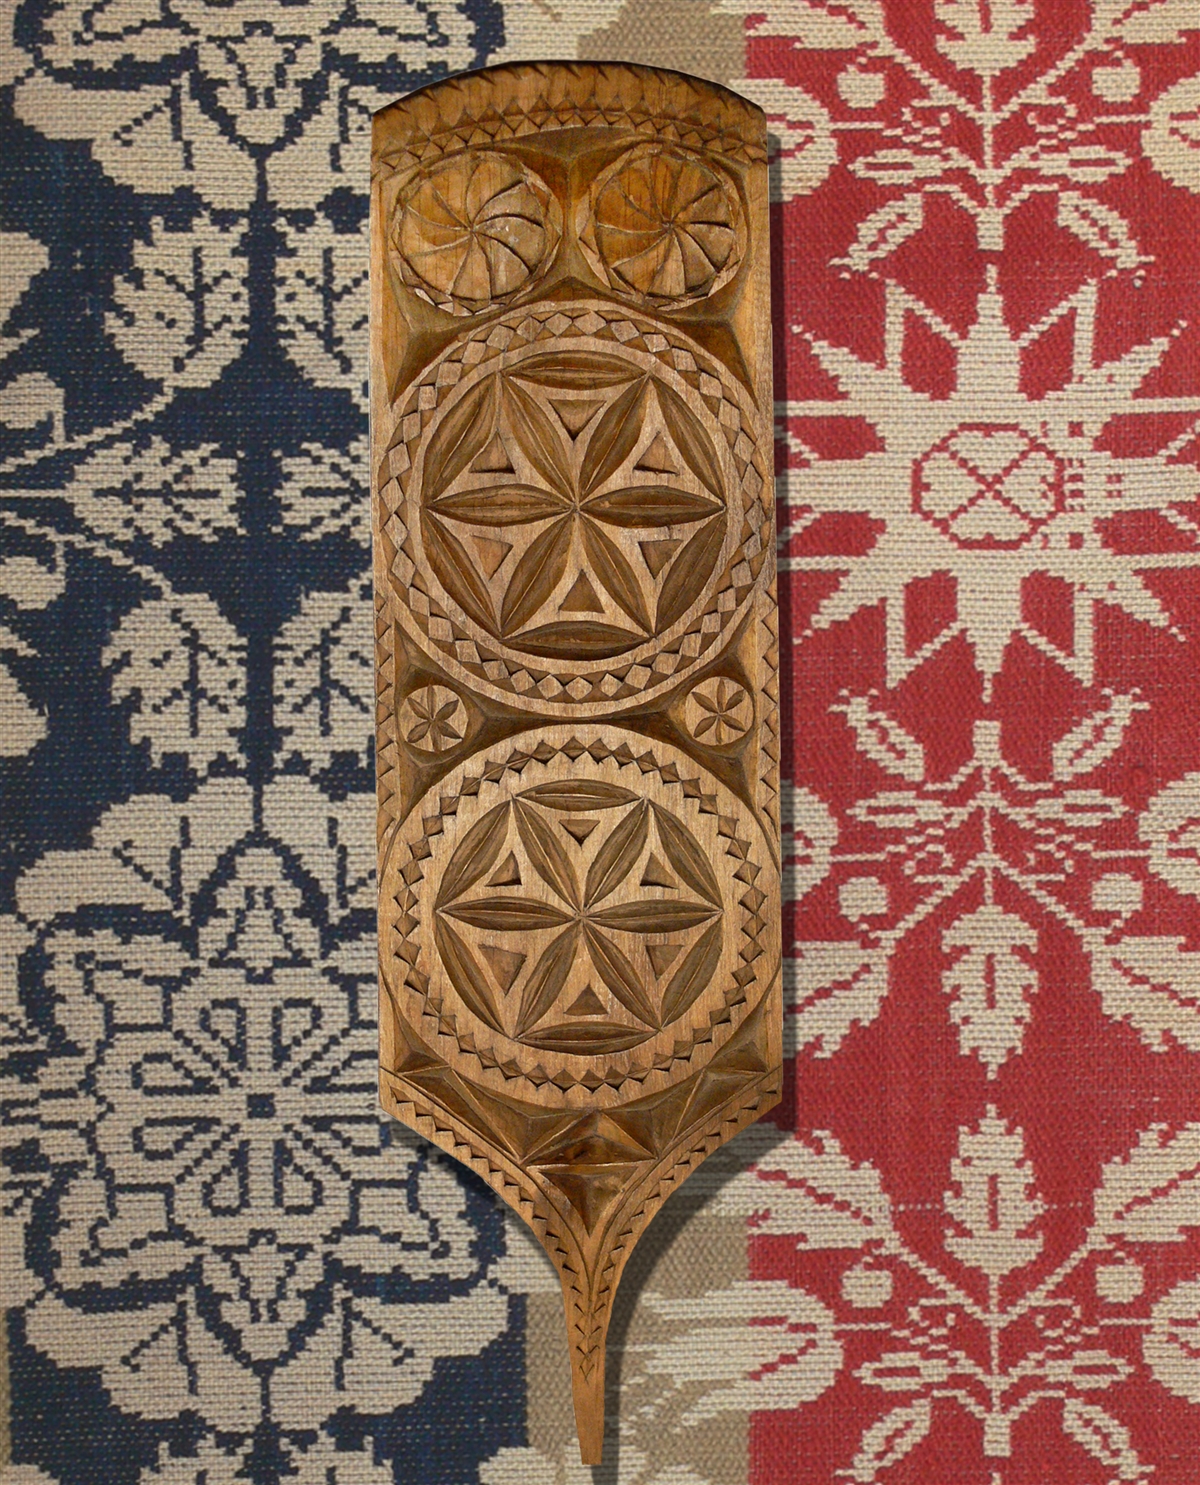 In the foreground of the image is a wooden paddle with a thin handle. The main body has two large 6-pointed chip-carved rosettes. There are two small 6-pointed rosettes between then, and two swirls at the top of the paddle. The border around the paddle is a sawtooth design. In the background is a woven coverlet. There are sections of blue, white, and red, with a repeating pattern of white stars, flowers, and leaves.